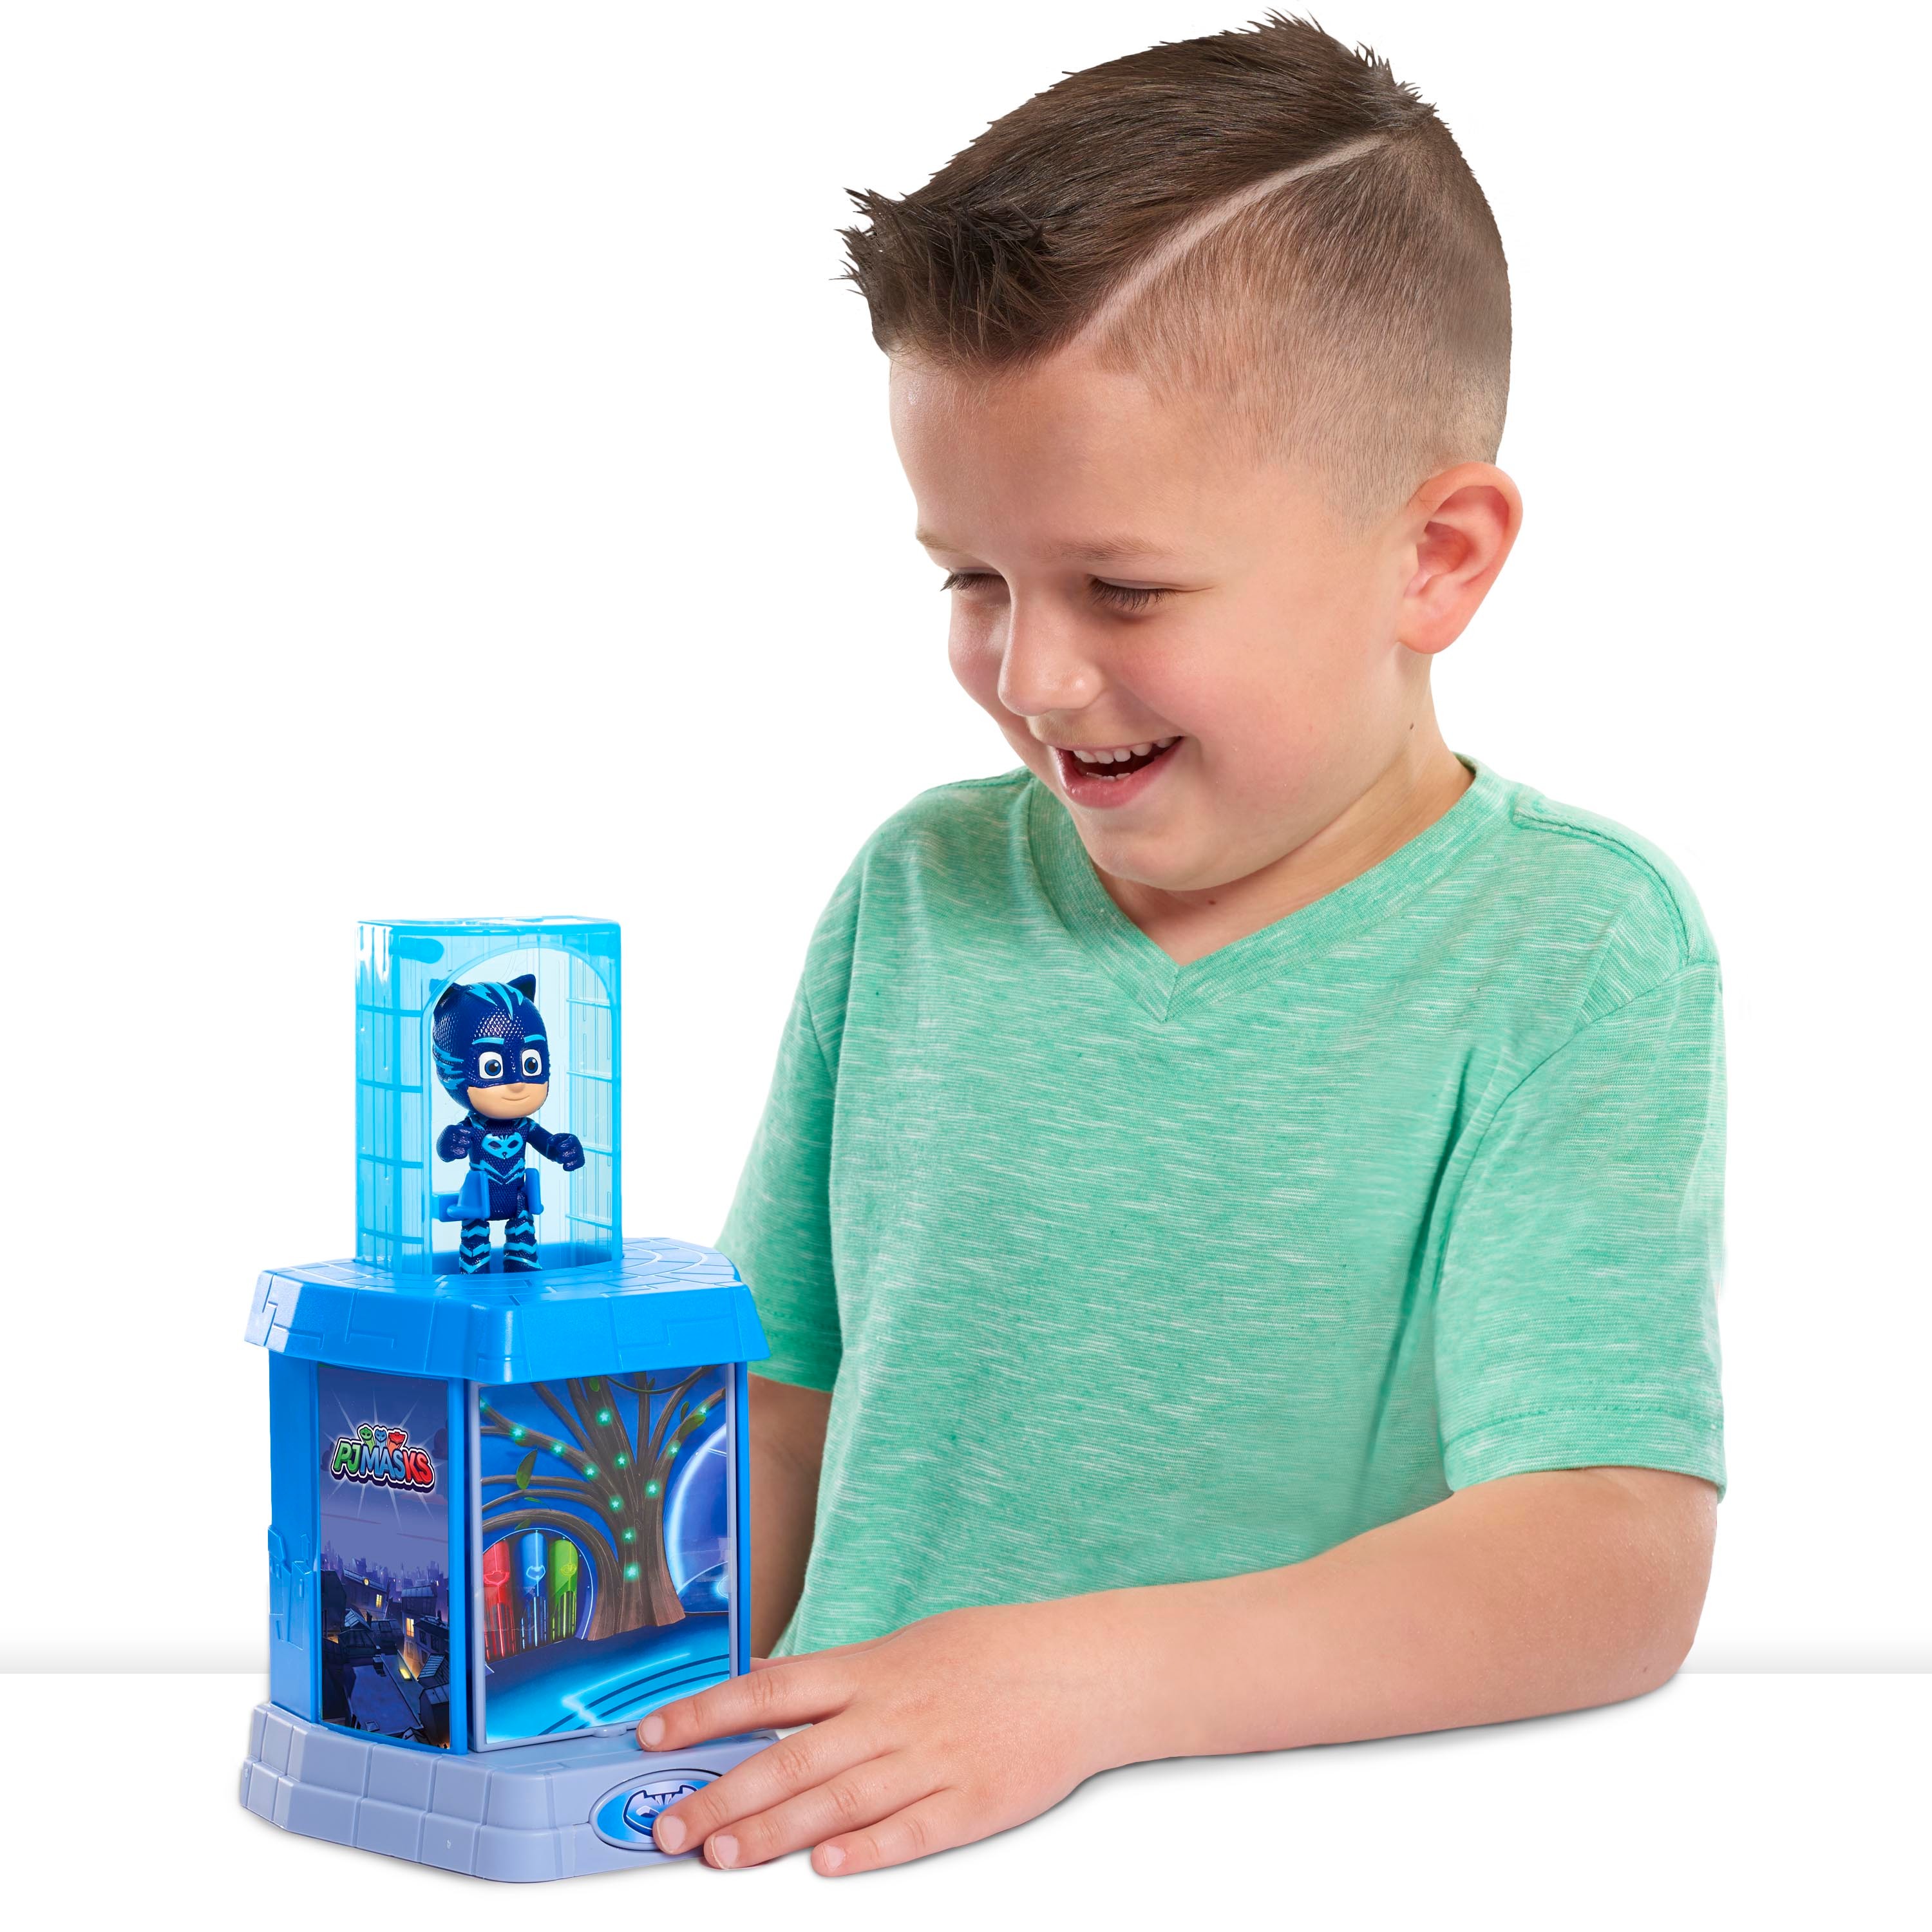 PJ Masks Transforming Figures, Catboy,  Kids Toys for Ages 3 Up, Gifts and Presents - image 3 of 4